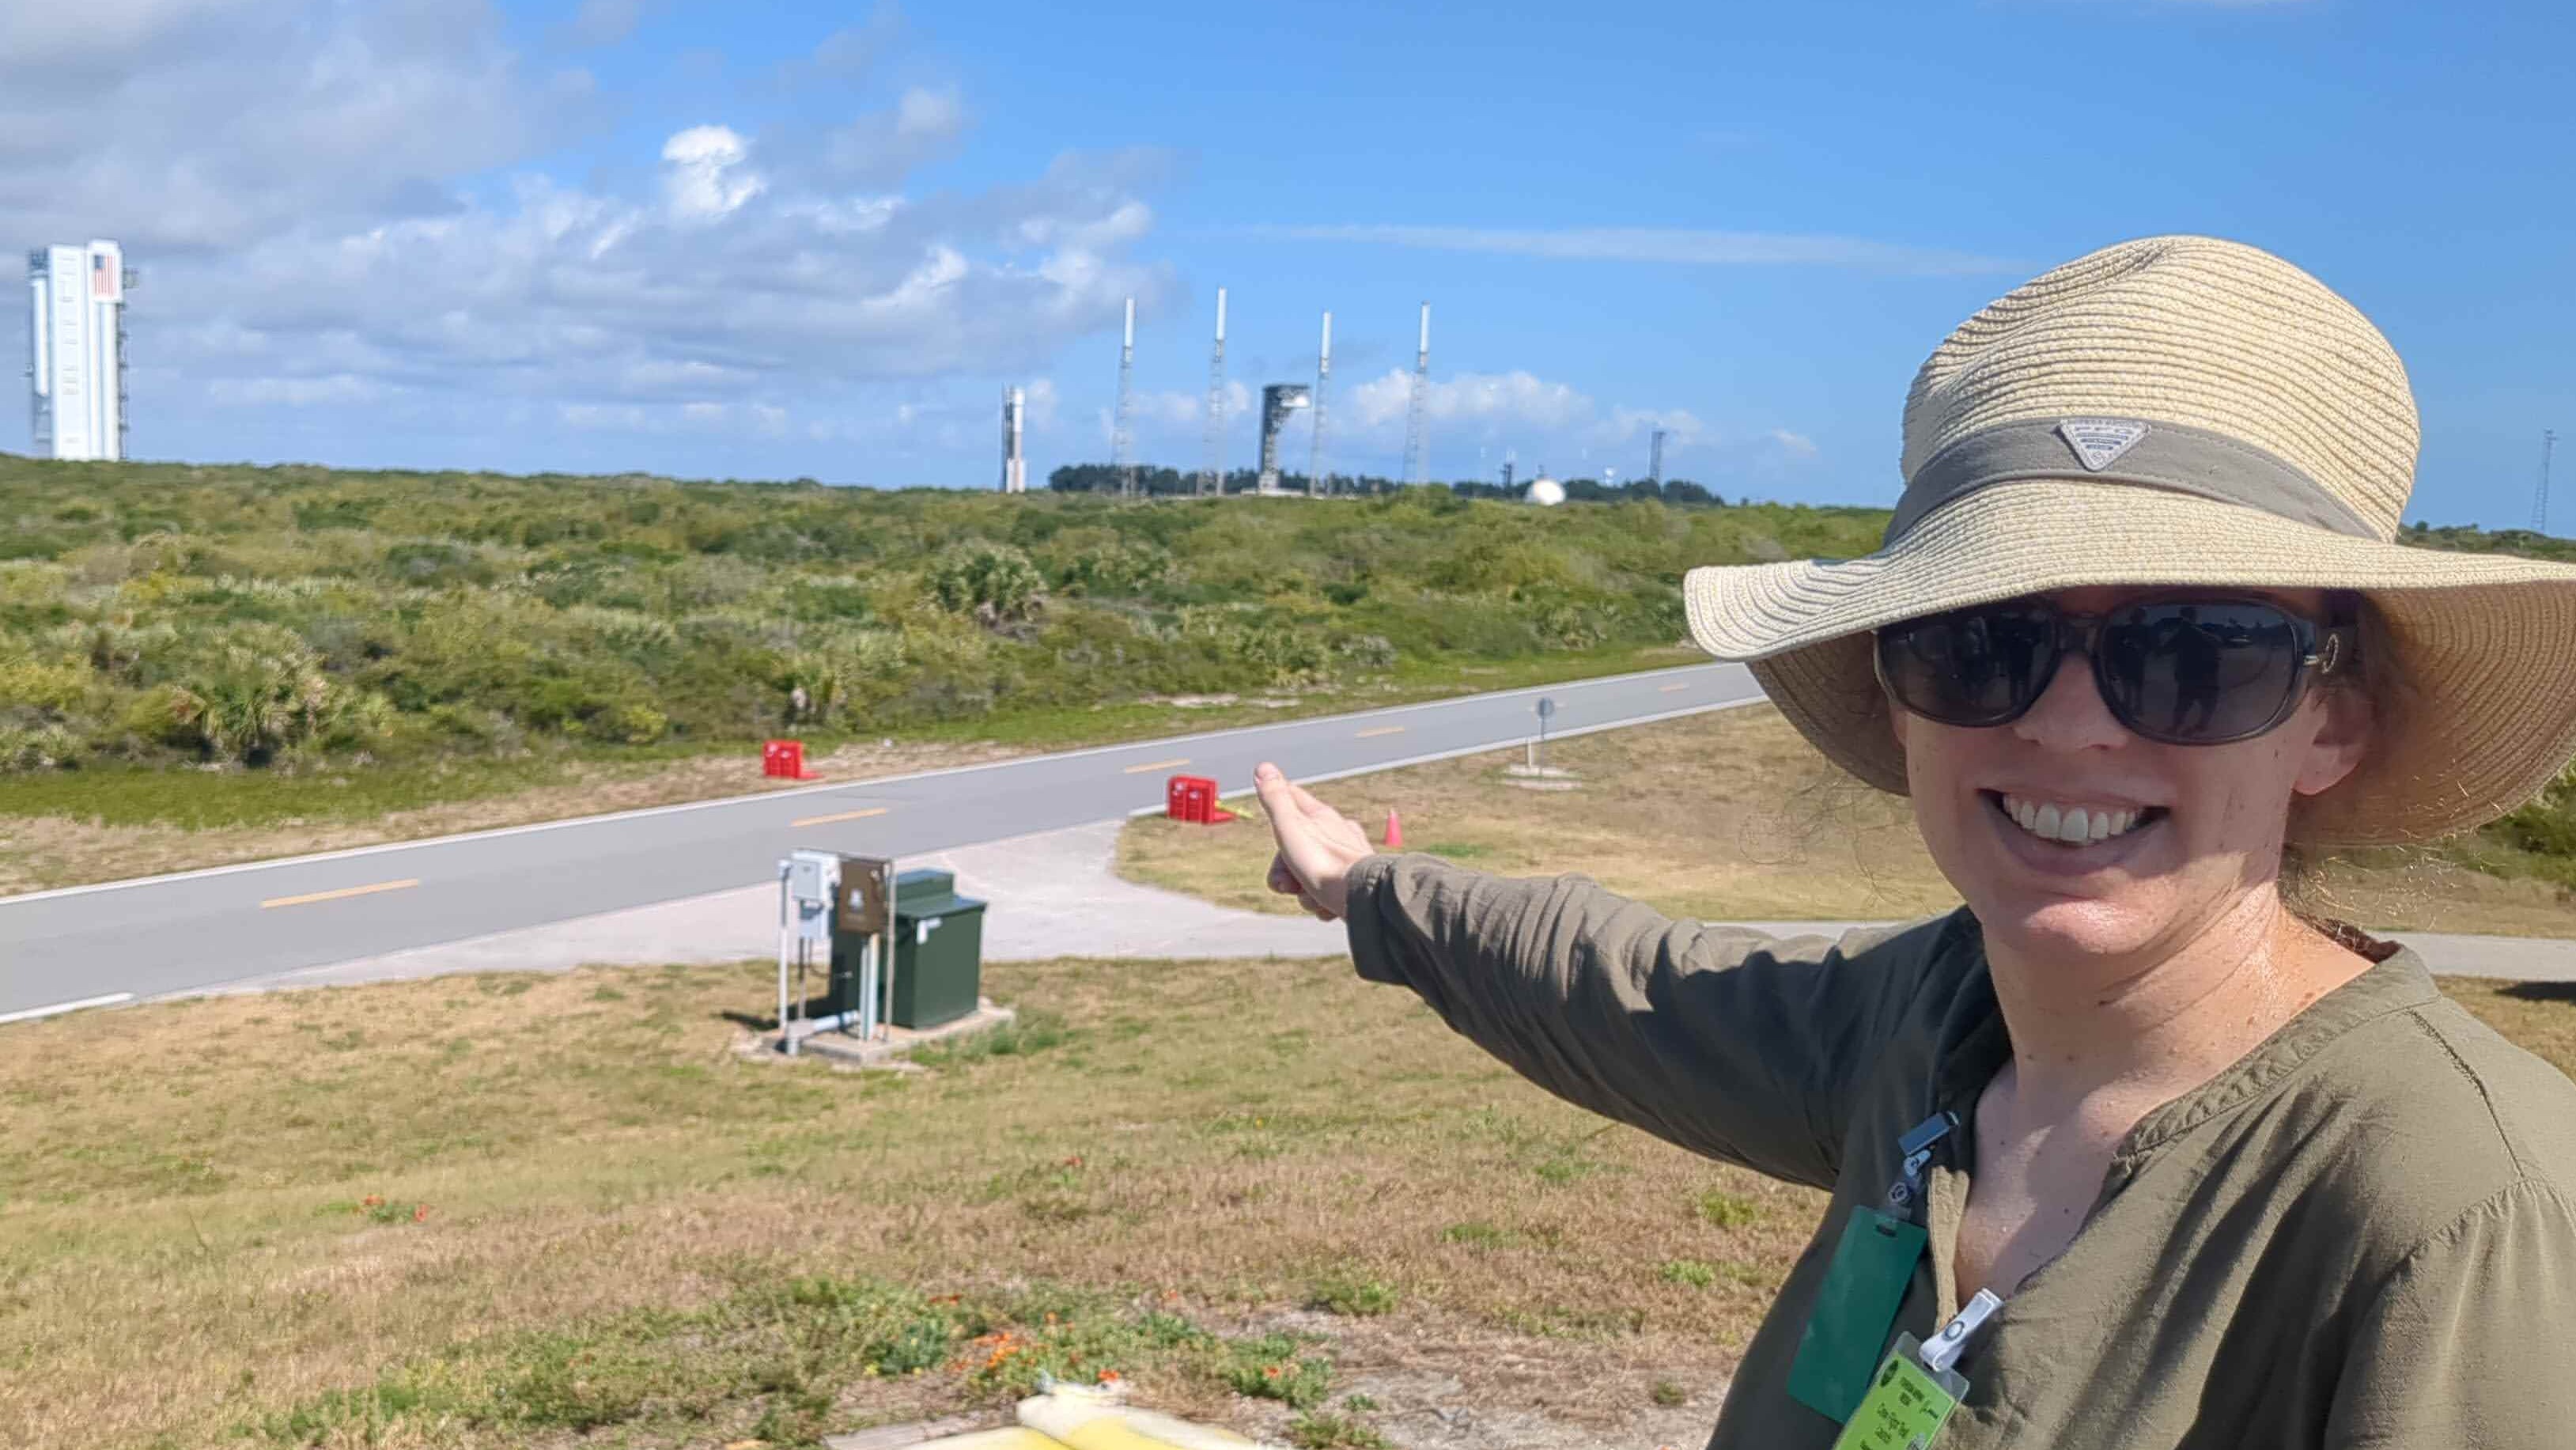 Smiling woman wearing a big hat and sunglasses.  She points across the road at a rocket and a distant launch pad in the background